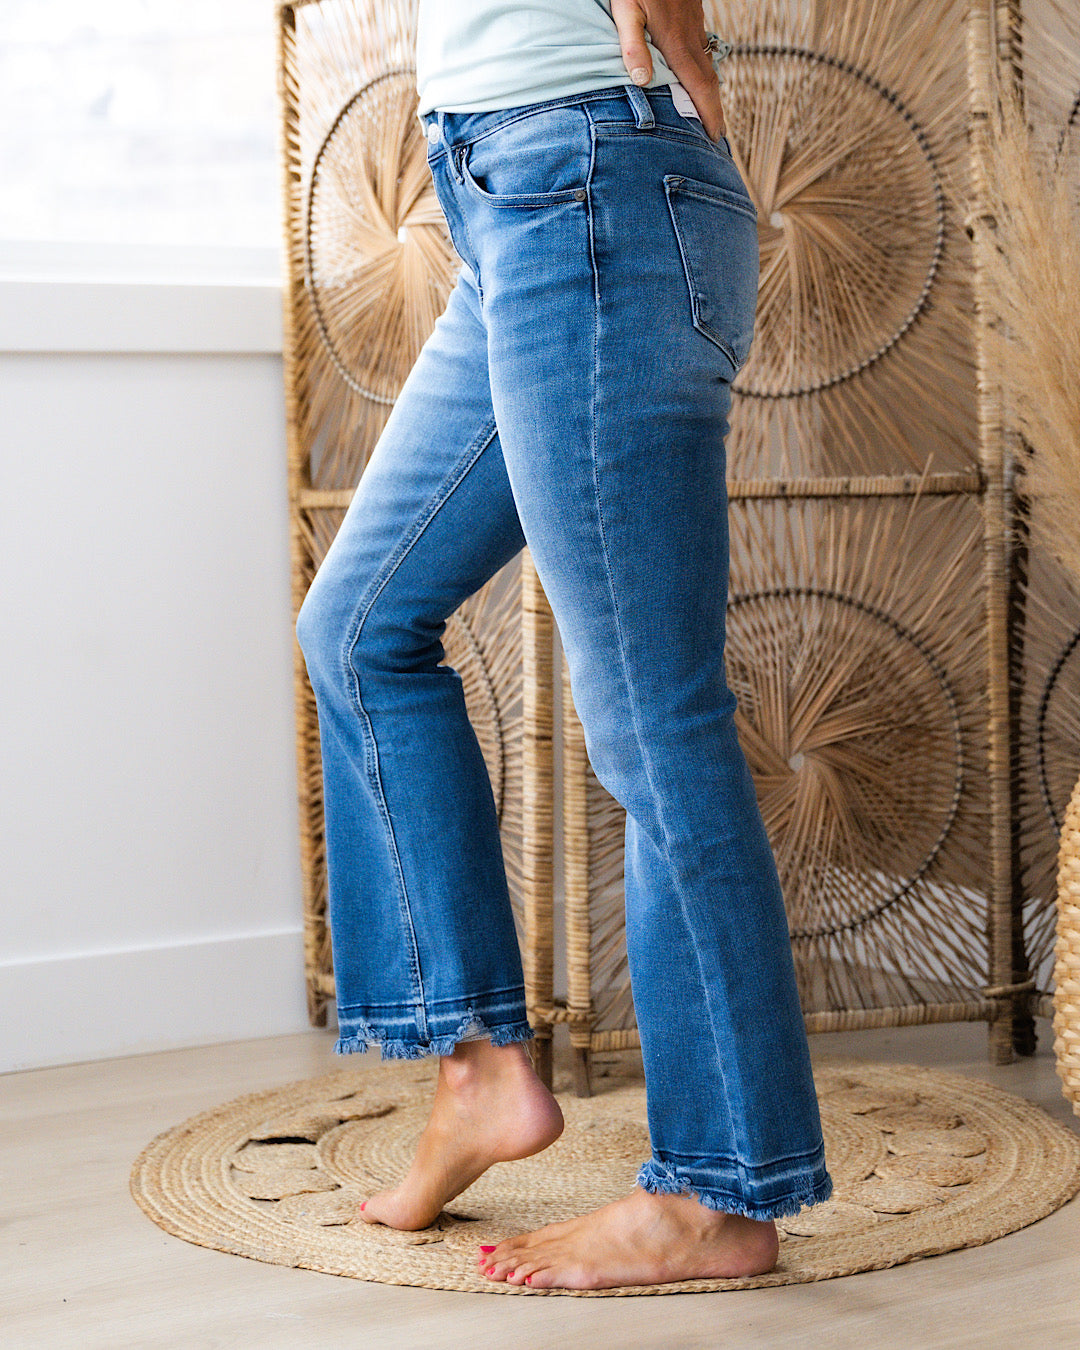 NEW! KanCan All I Know Non Distressed Crop Bootcut Jeans  KanCan   